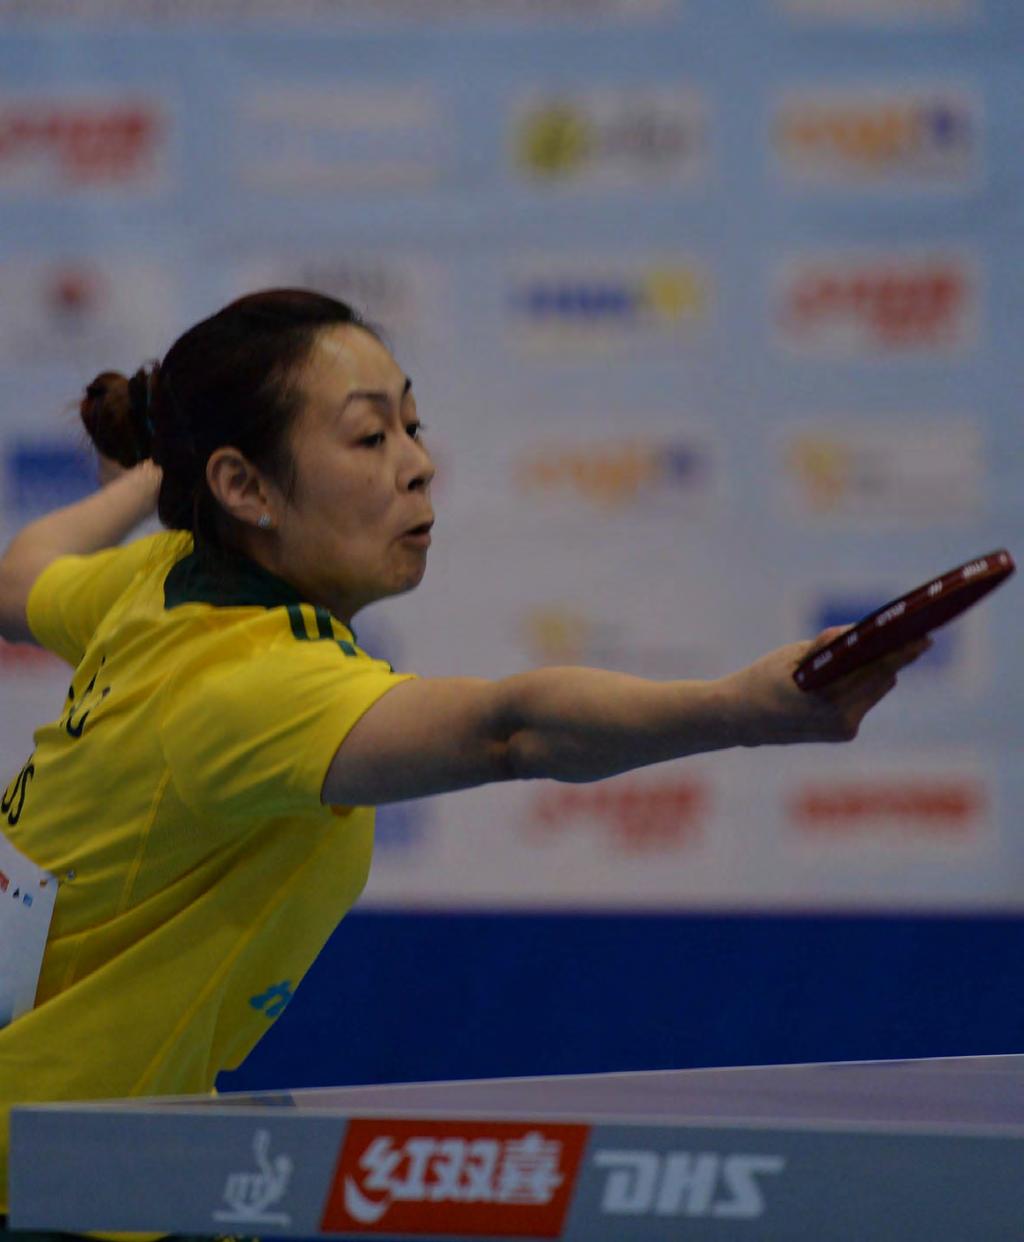 ITTF-OCEANIA EVENTS EVENT 1: ITTF- OCEANIA CUP QUALIFICATION FOR THE PRESTIGIOUS ITTF WORLD CUP The annual ITTF-Oceania Cup brings together the best 8 Men and 8 Women from the region to compete.